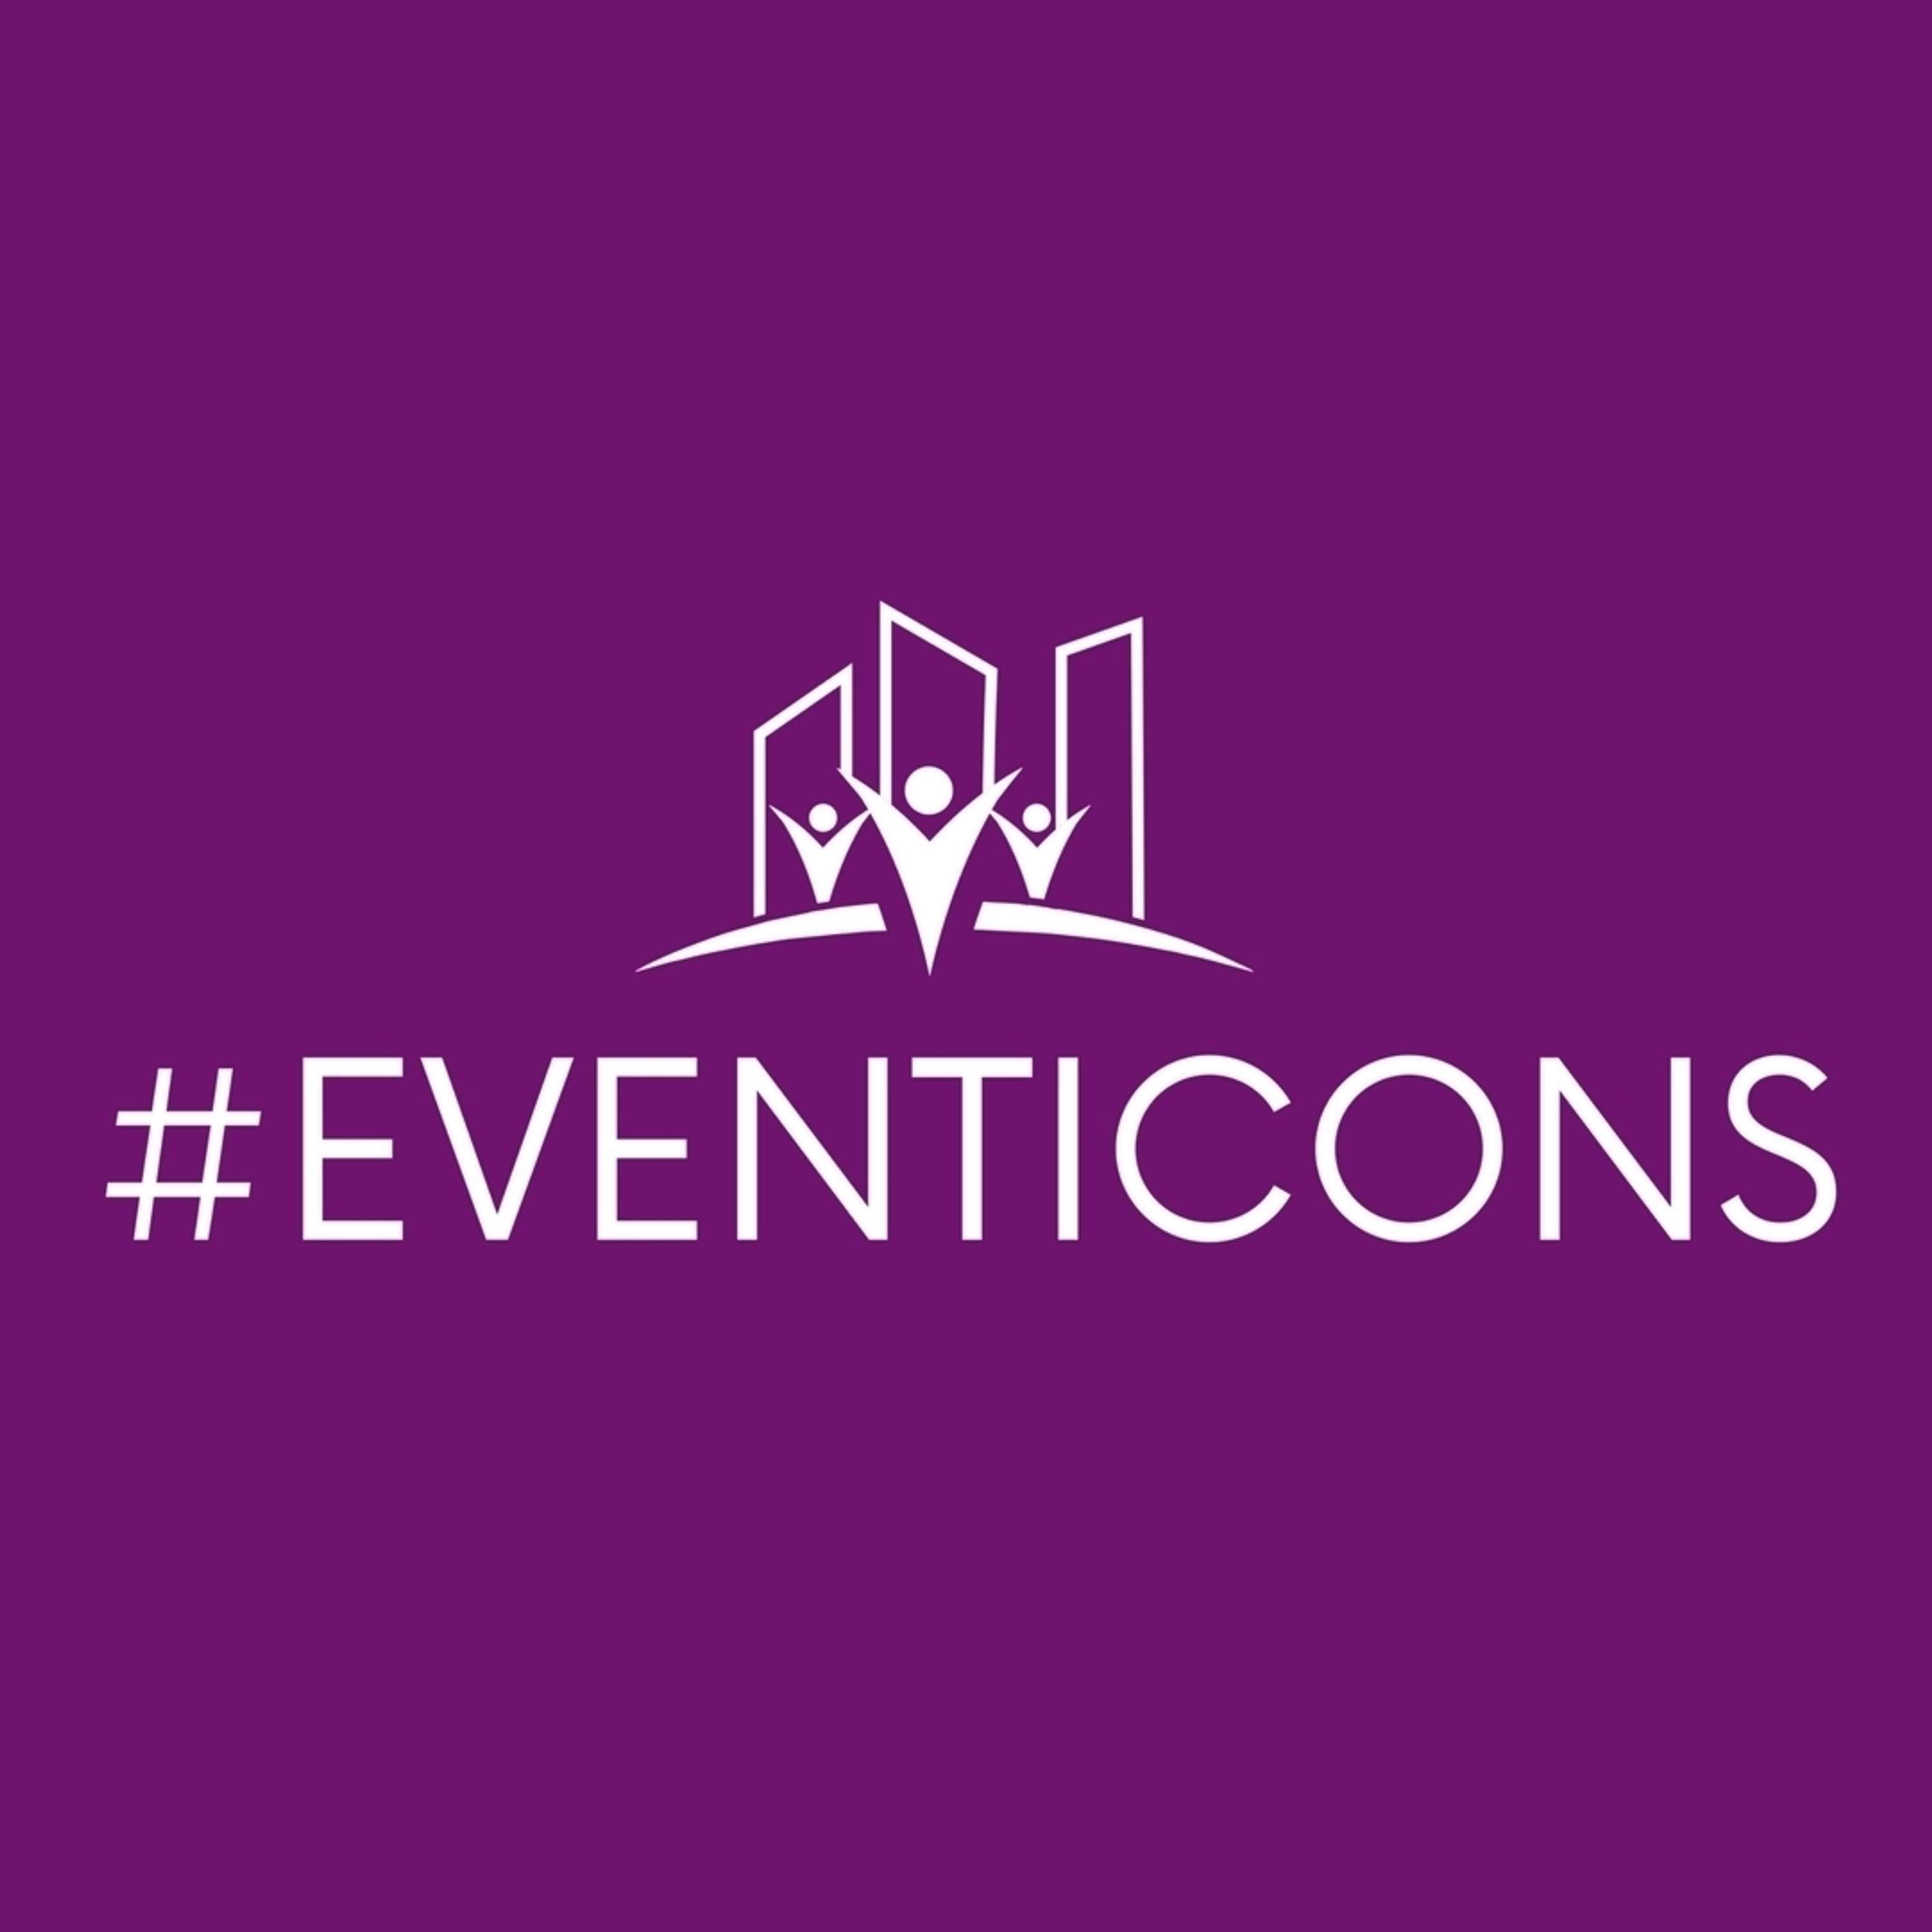 EventIcons Ep 201 - 2020 Event Tech Trends That Will Shape The Year